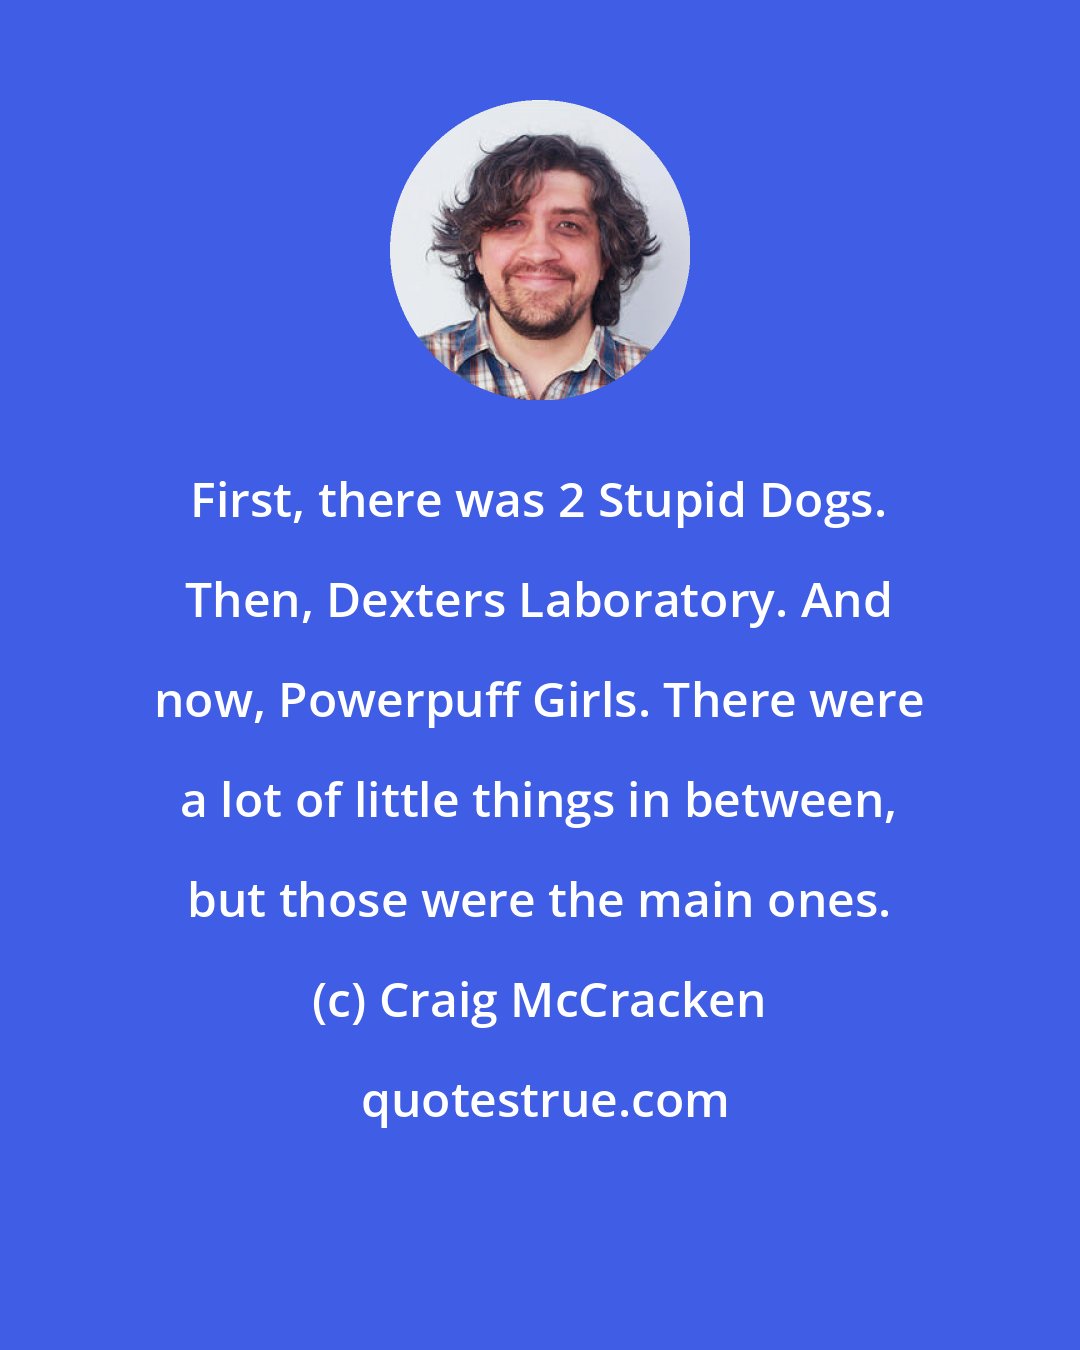 Craig McCracken: First, there was 2 Stupid Dogs. Then, Dexters Laboratory. And now, Powerpuff Girls. There were a lot of little things in between, but those were the main ones.